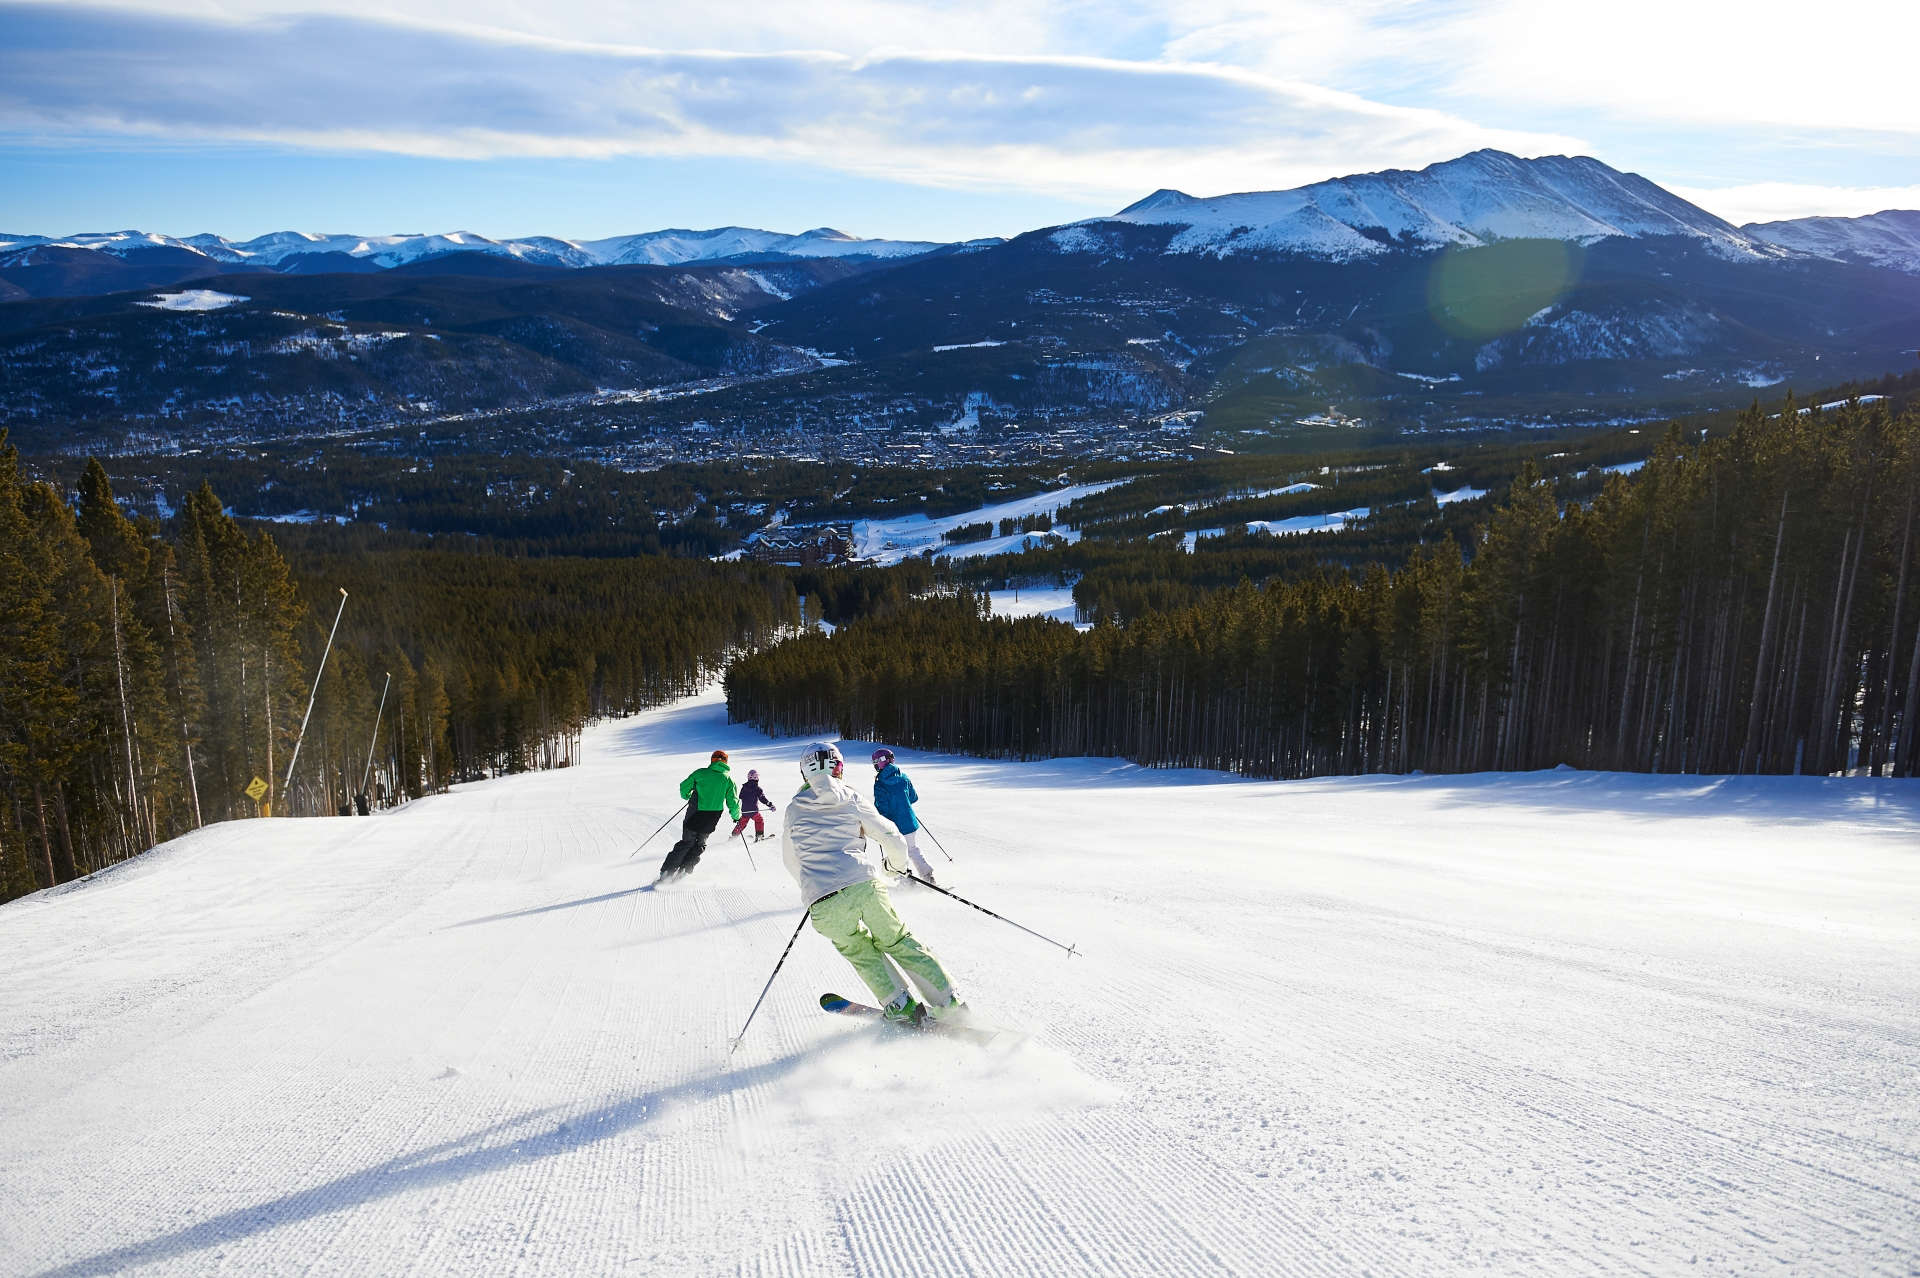 Breckenridge Ski Packages. Lowest Prices, Best Ski Deals Guaranteed